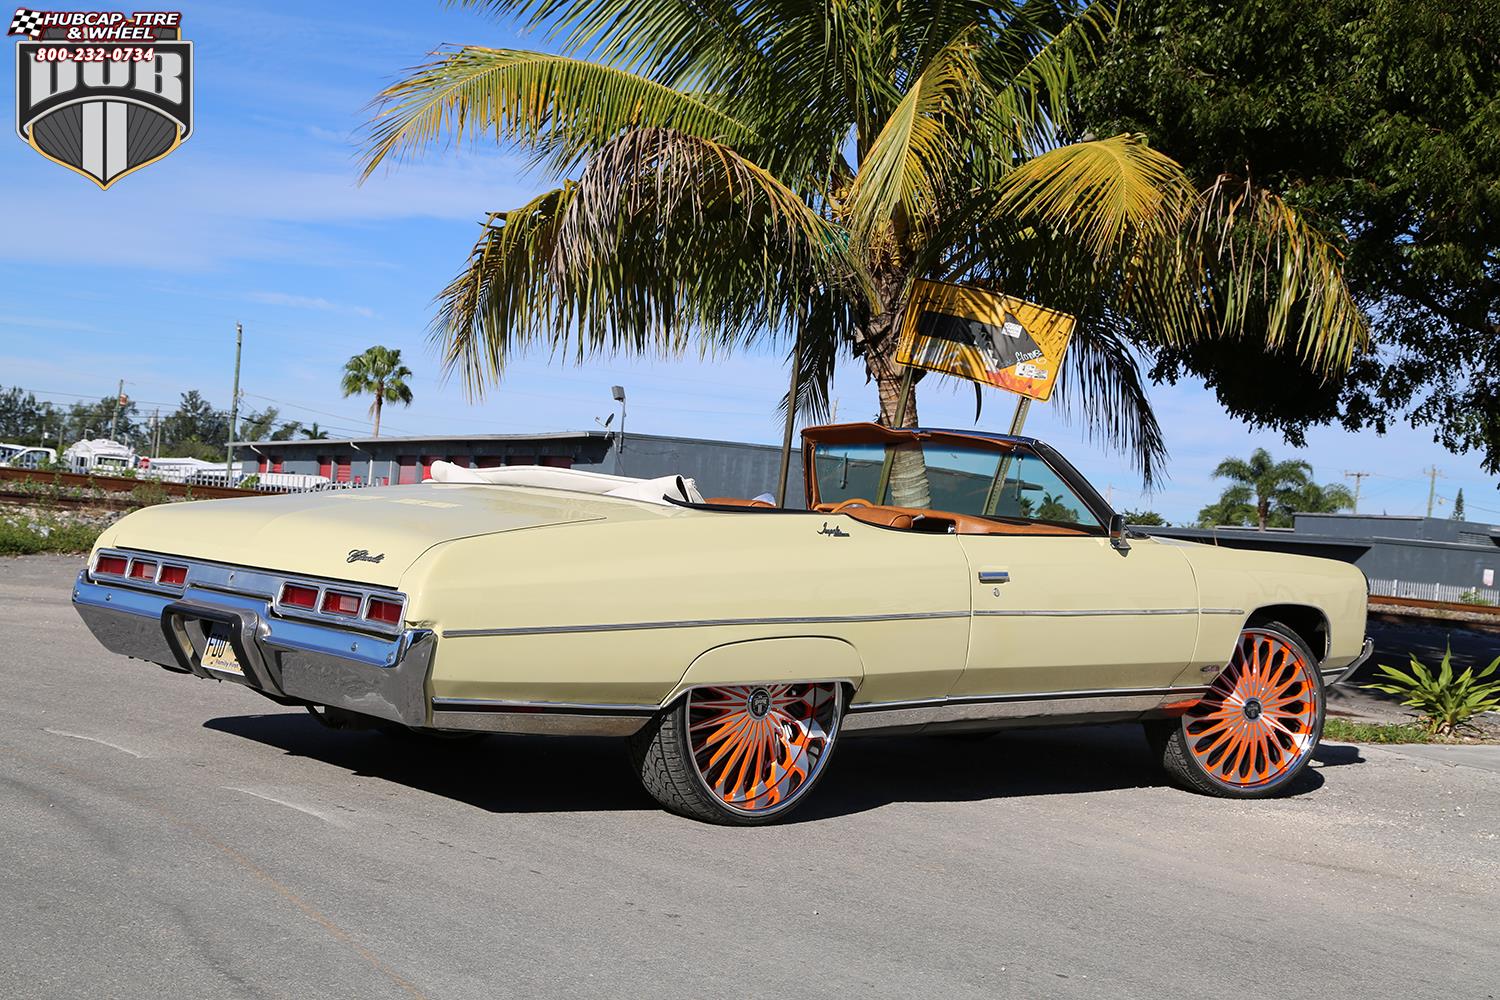 vehicle gallery/chevrolet impala dub s718 fate 26X9  Orange & Milled wheels and rims